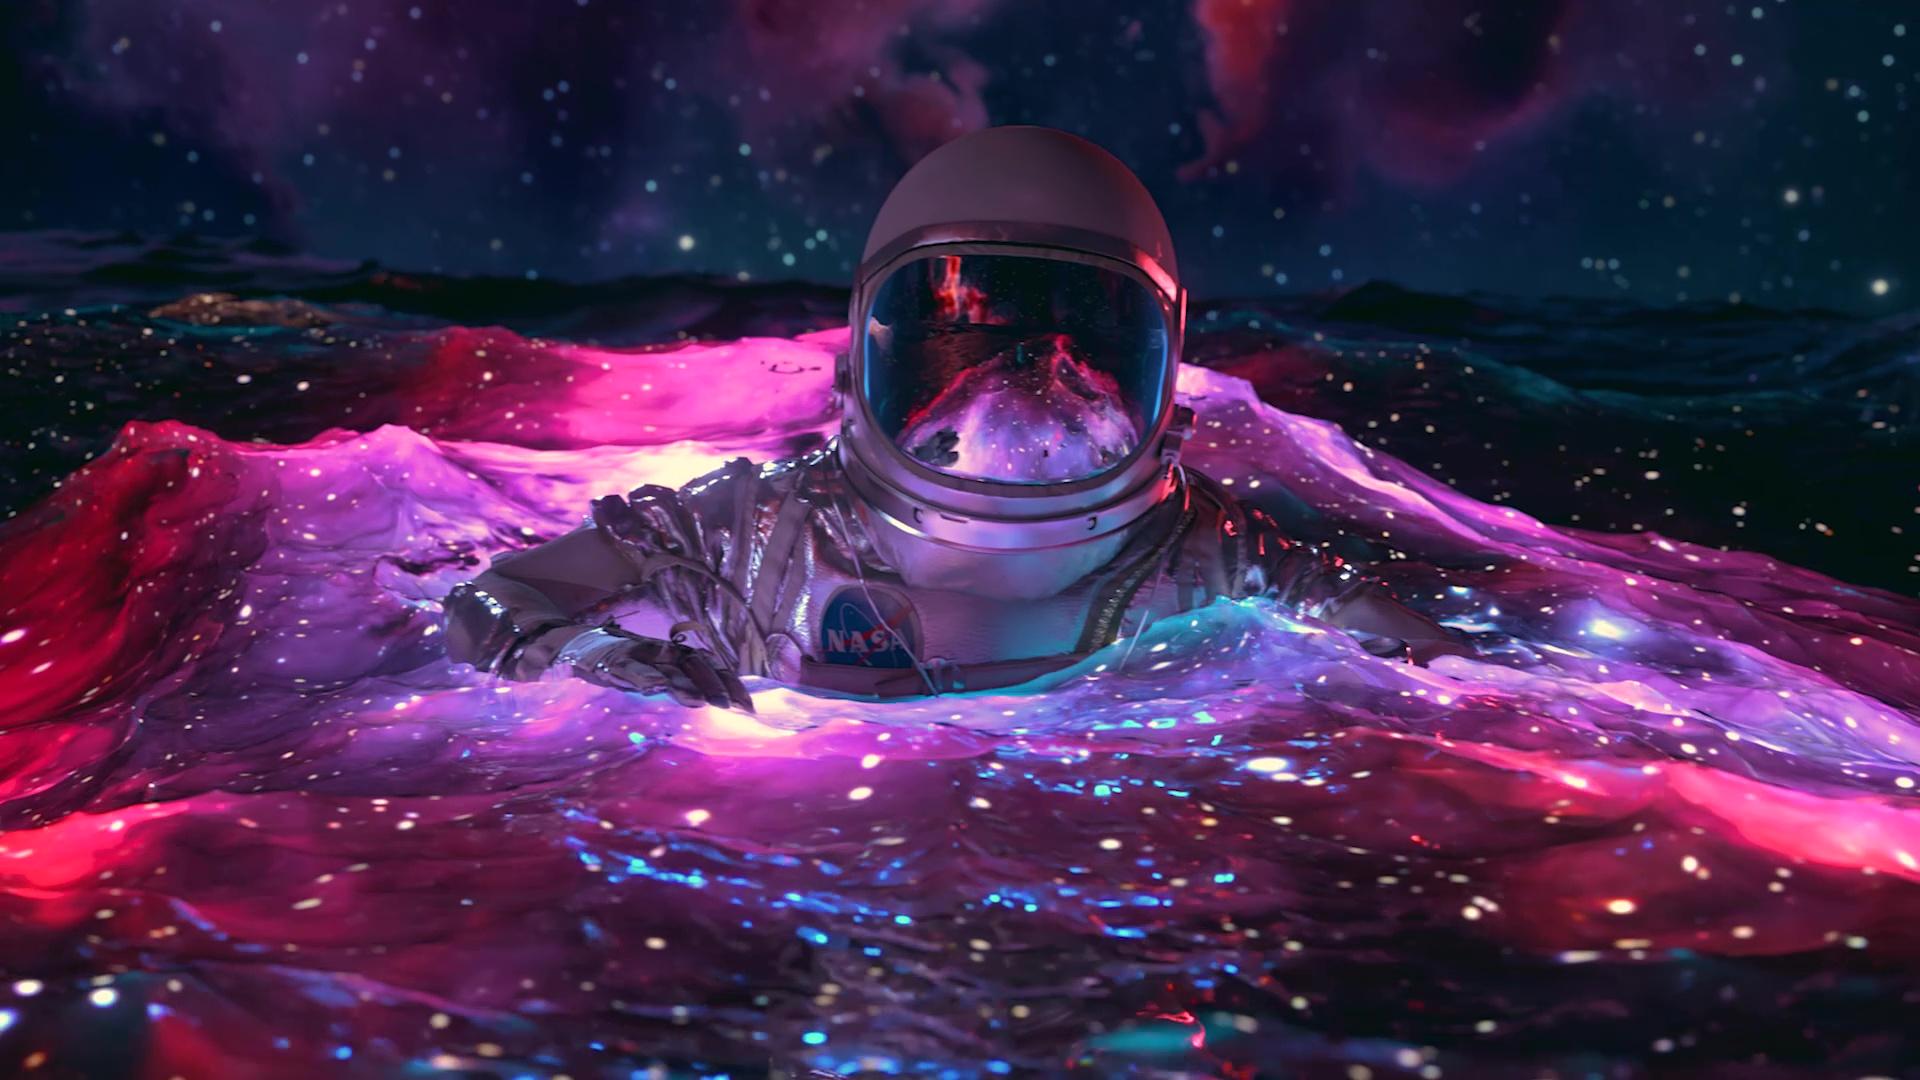 Floating In Space Wallpapers - Top Free Floating In Space Backgrounds